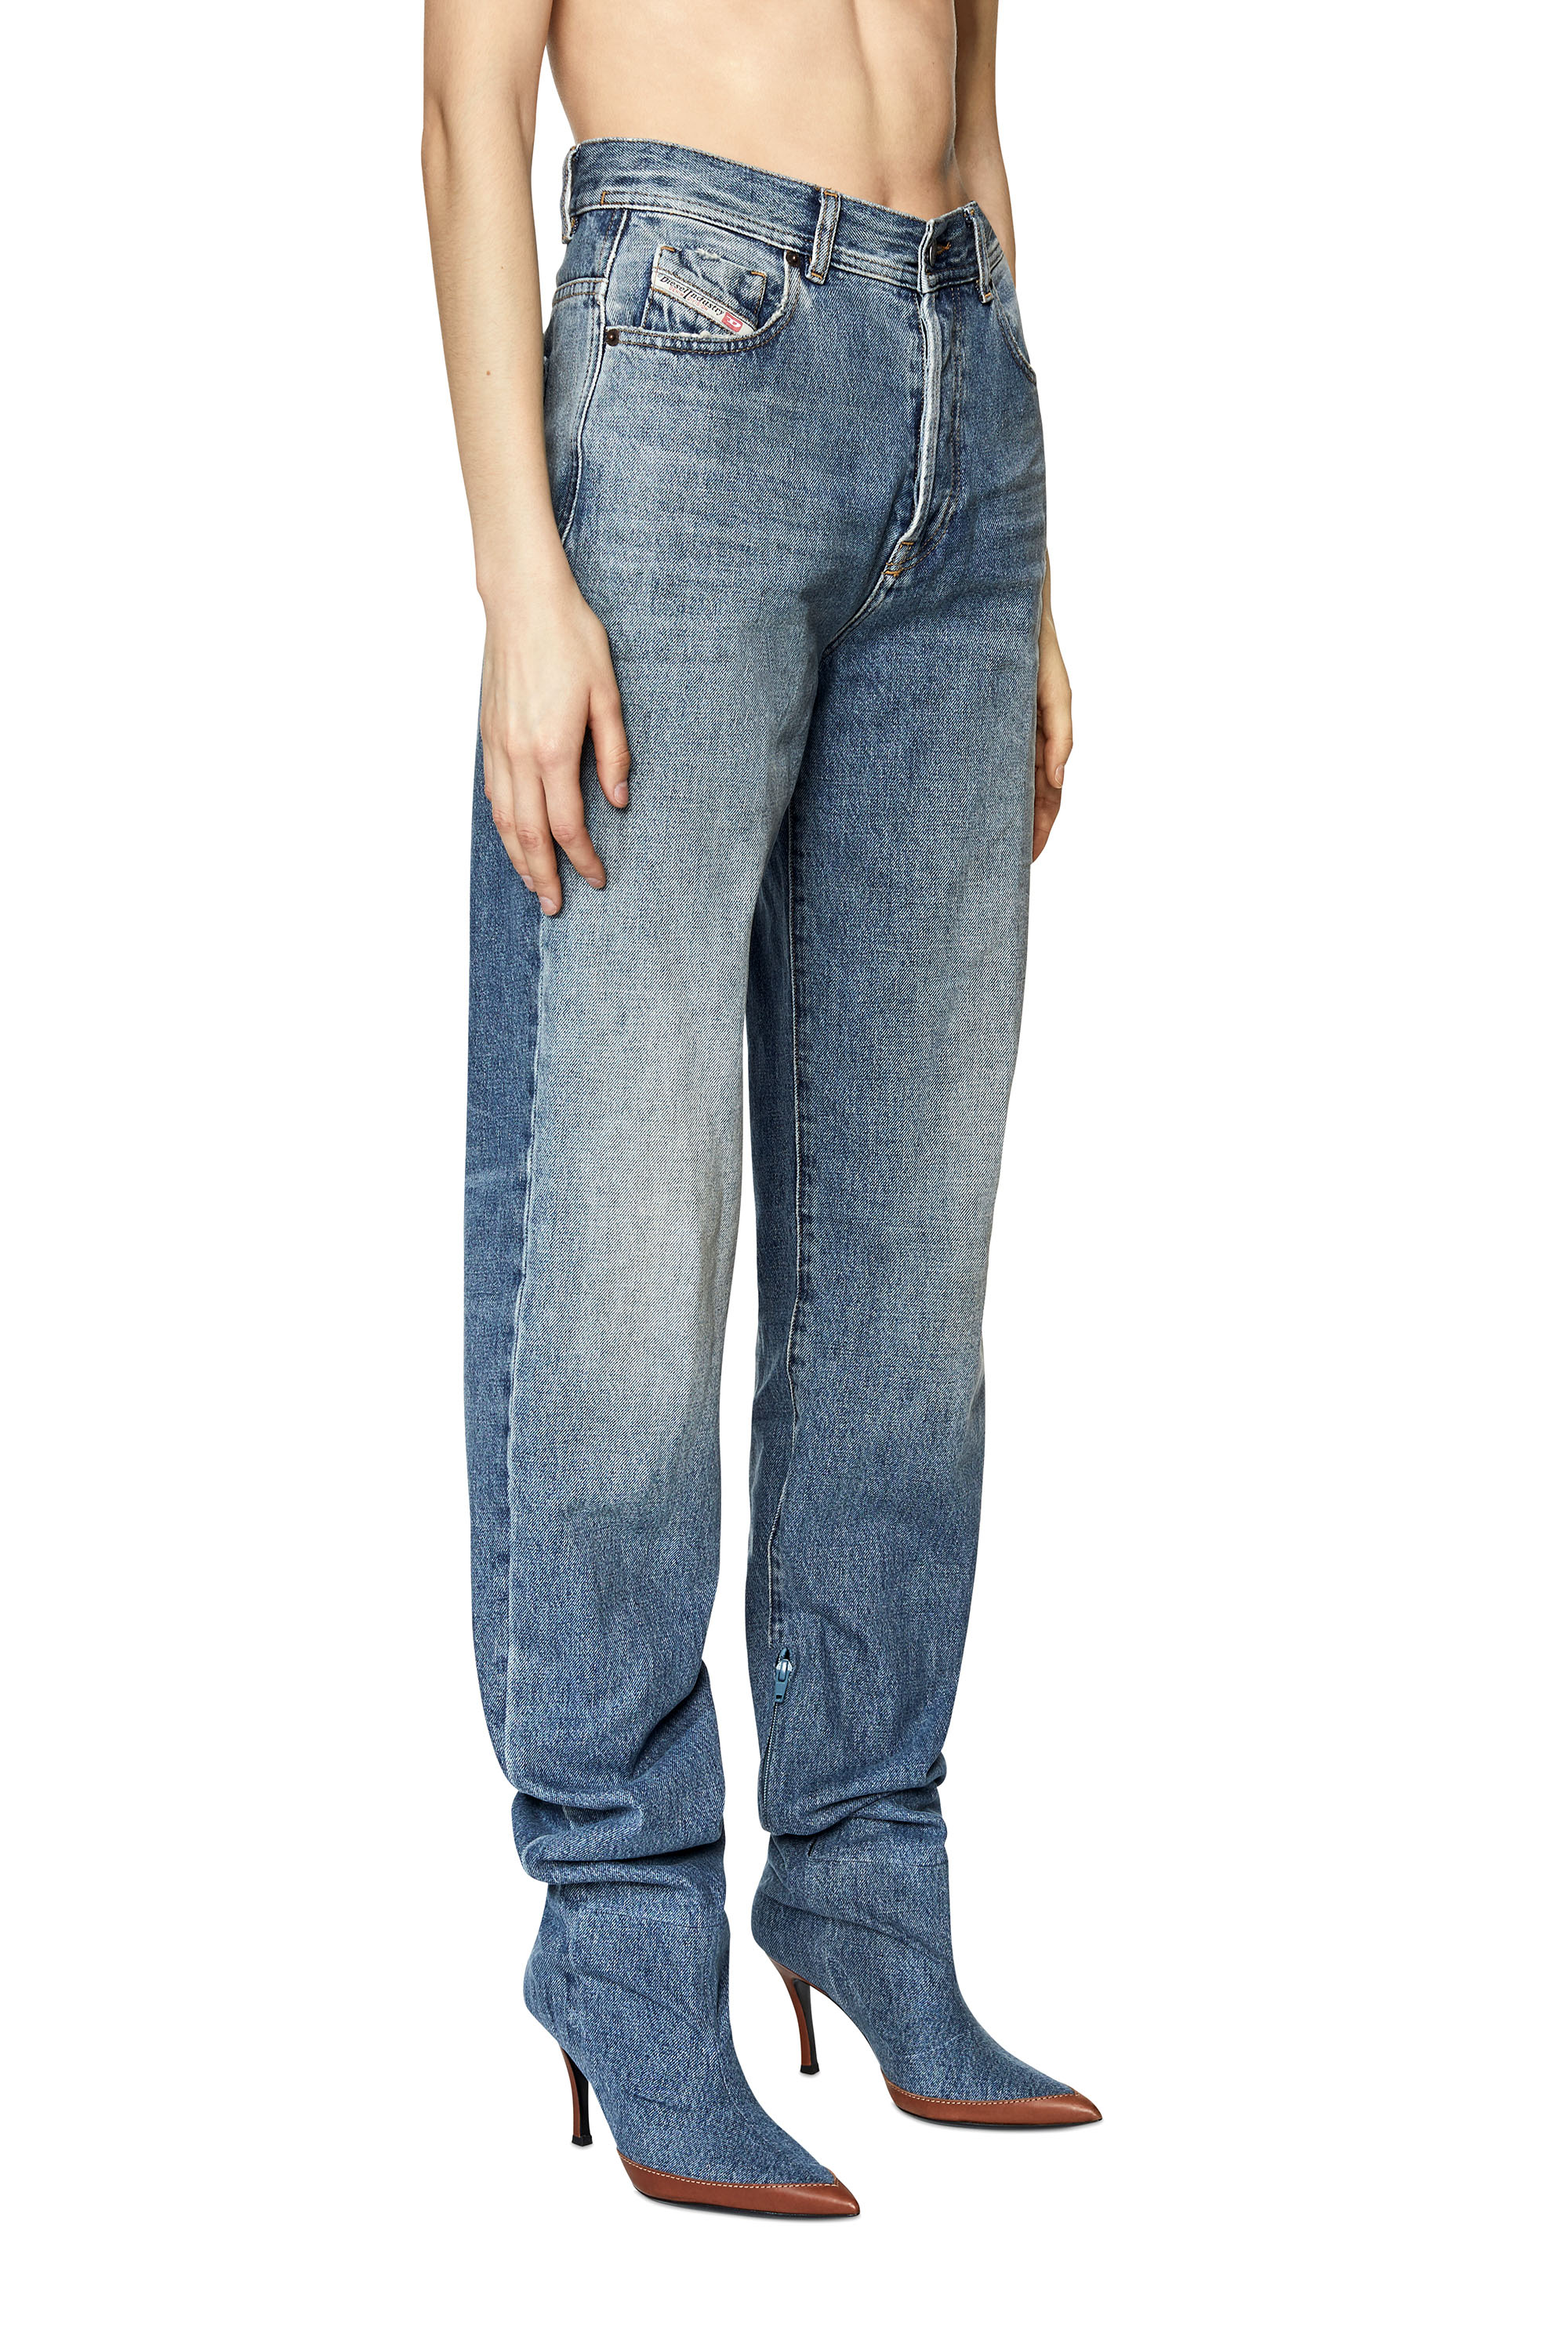 Diesel - 1956 007A7 Straight Jeans,  - Image 5